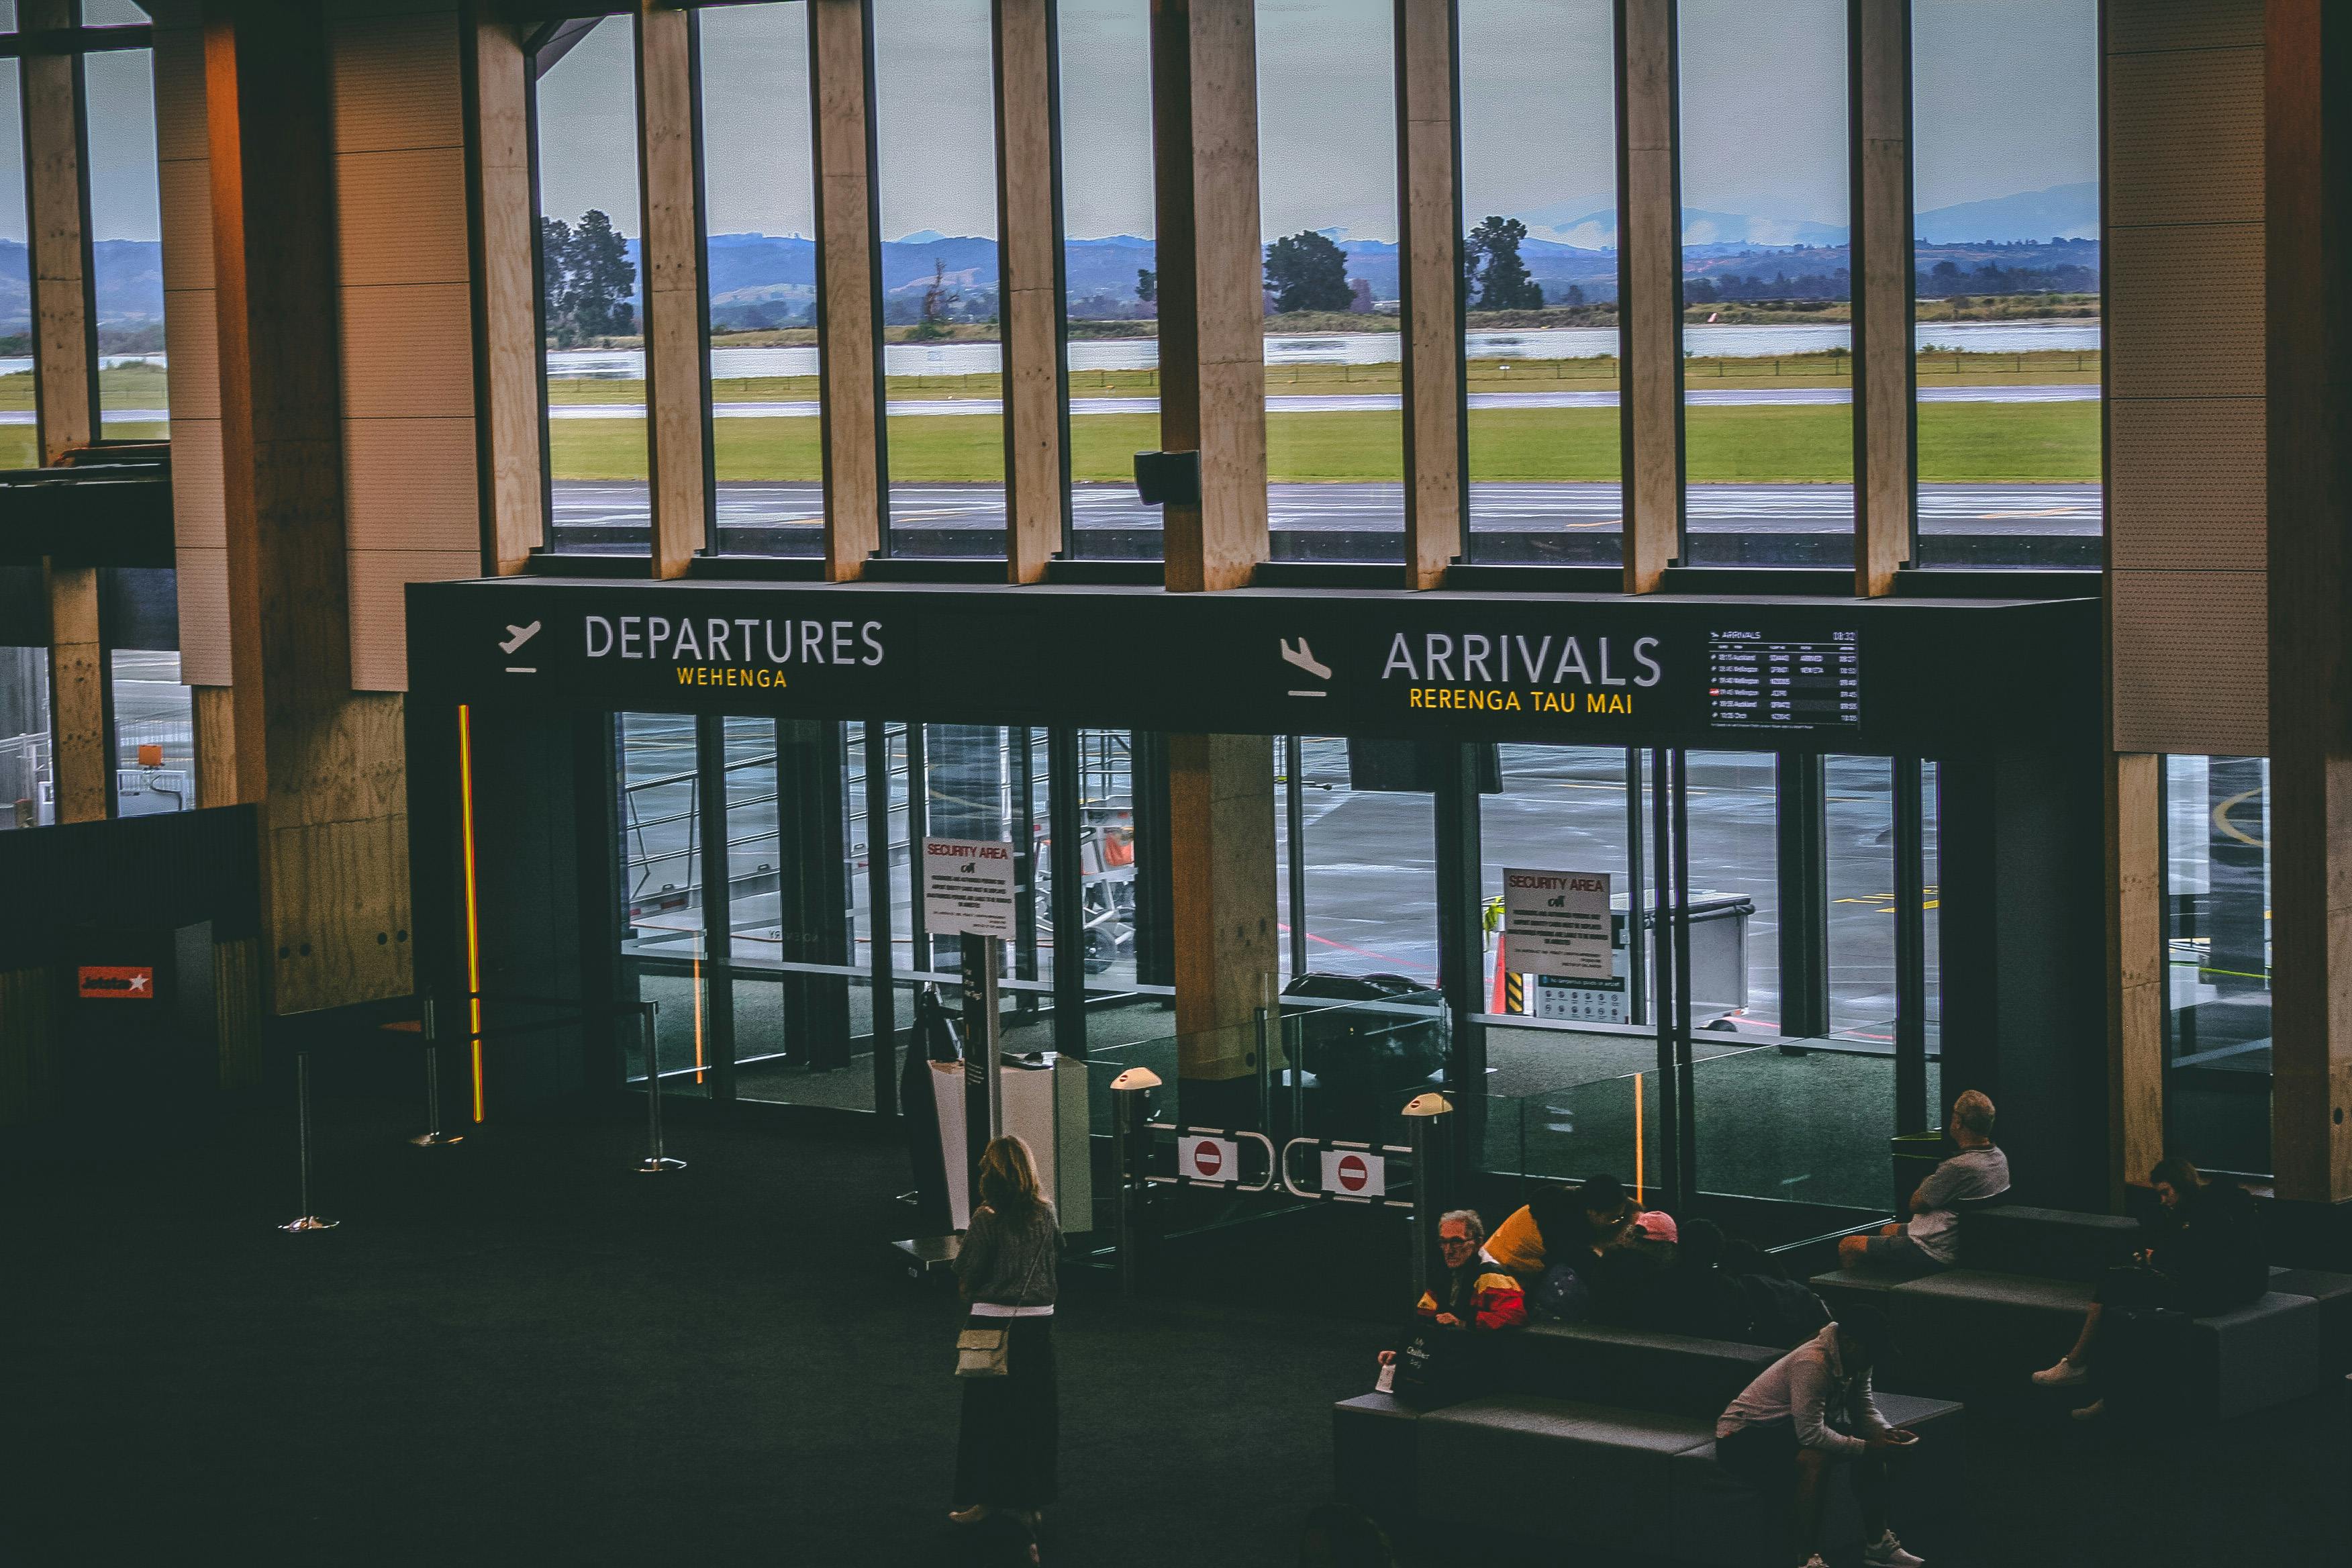 An airport | Source: Pexels